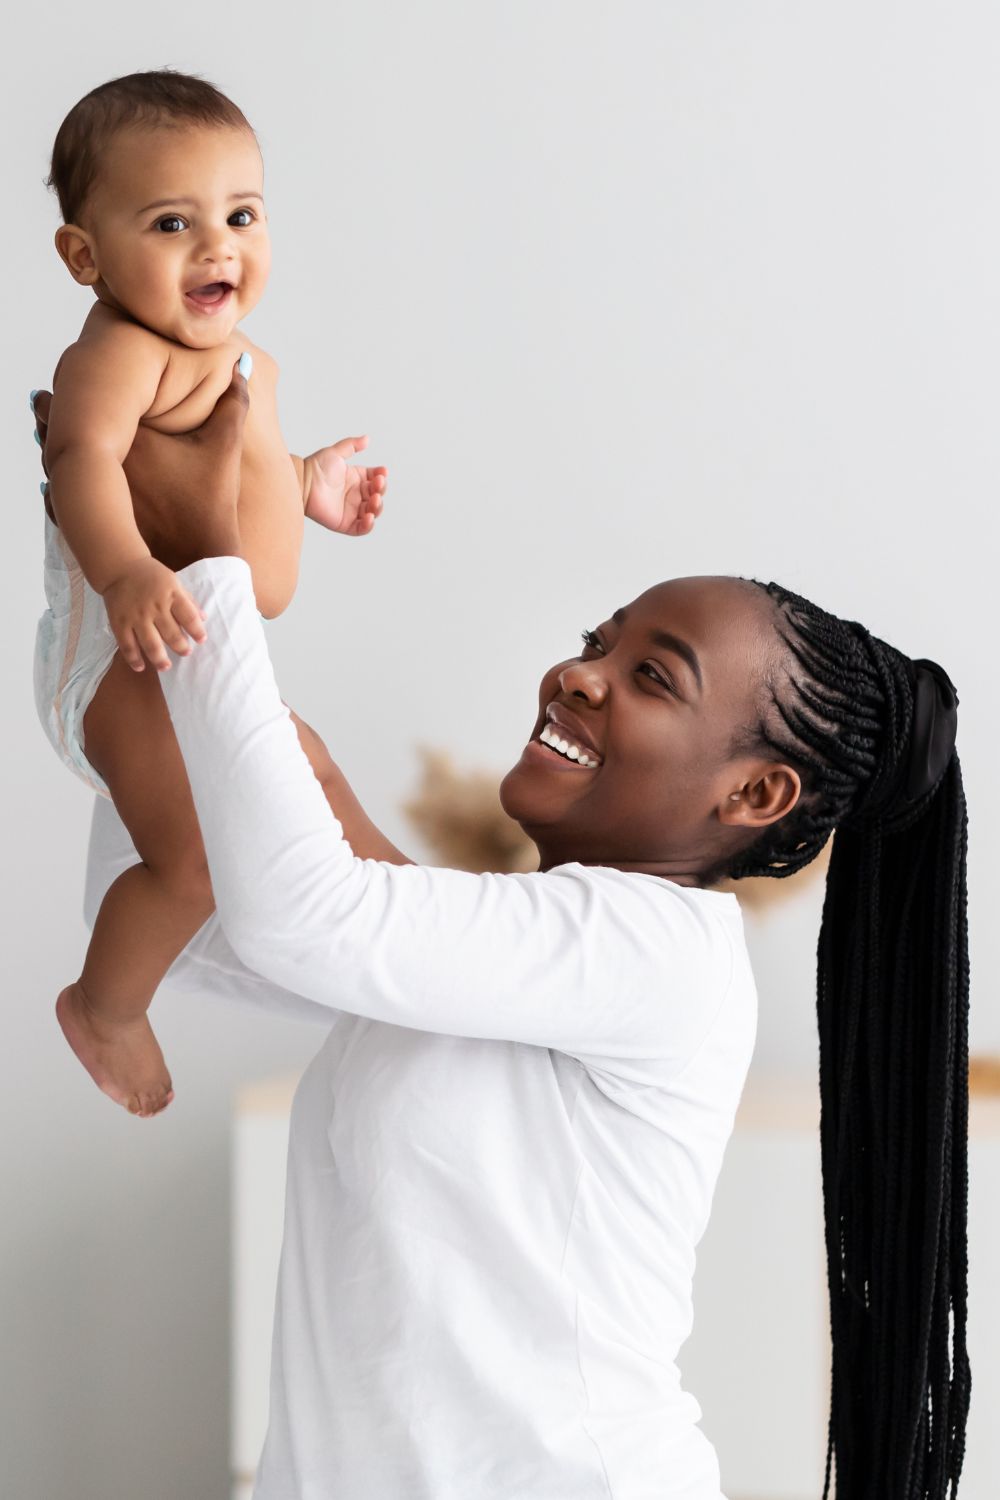 a photo of a woman holding a baby up in the air while smiling